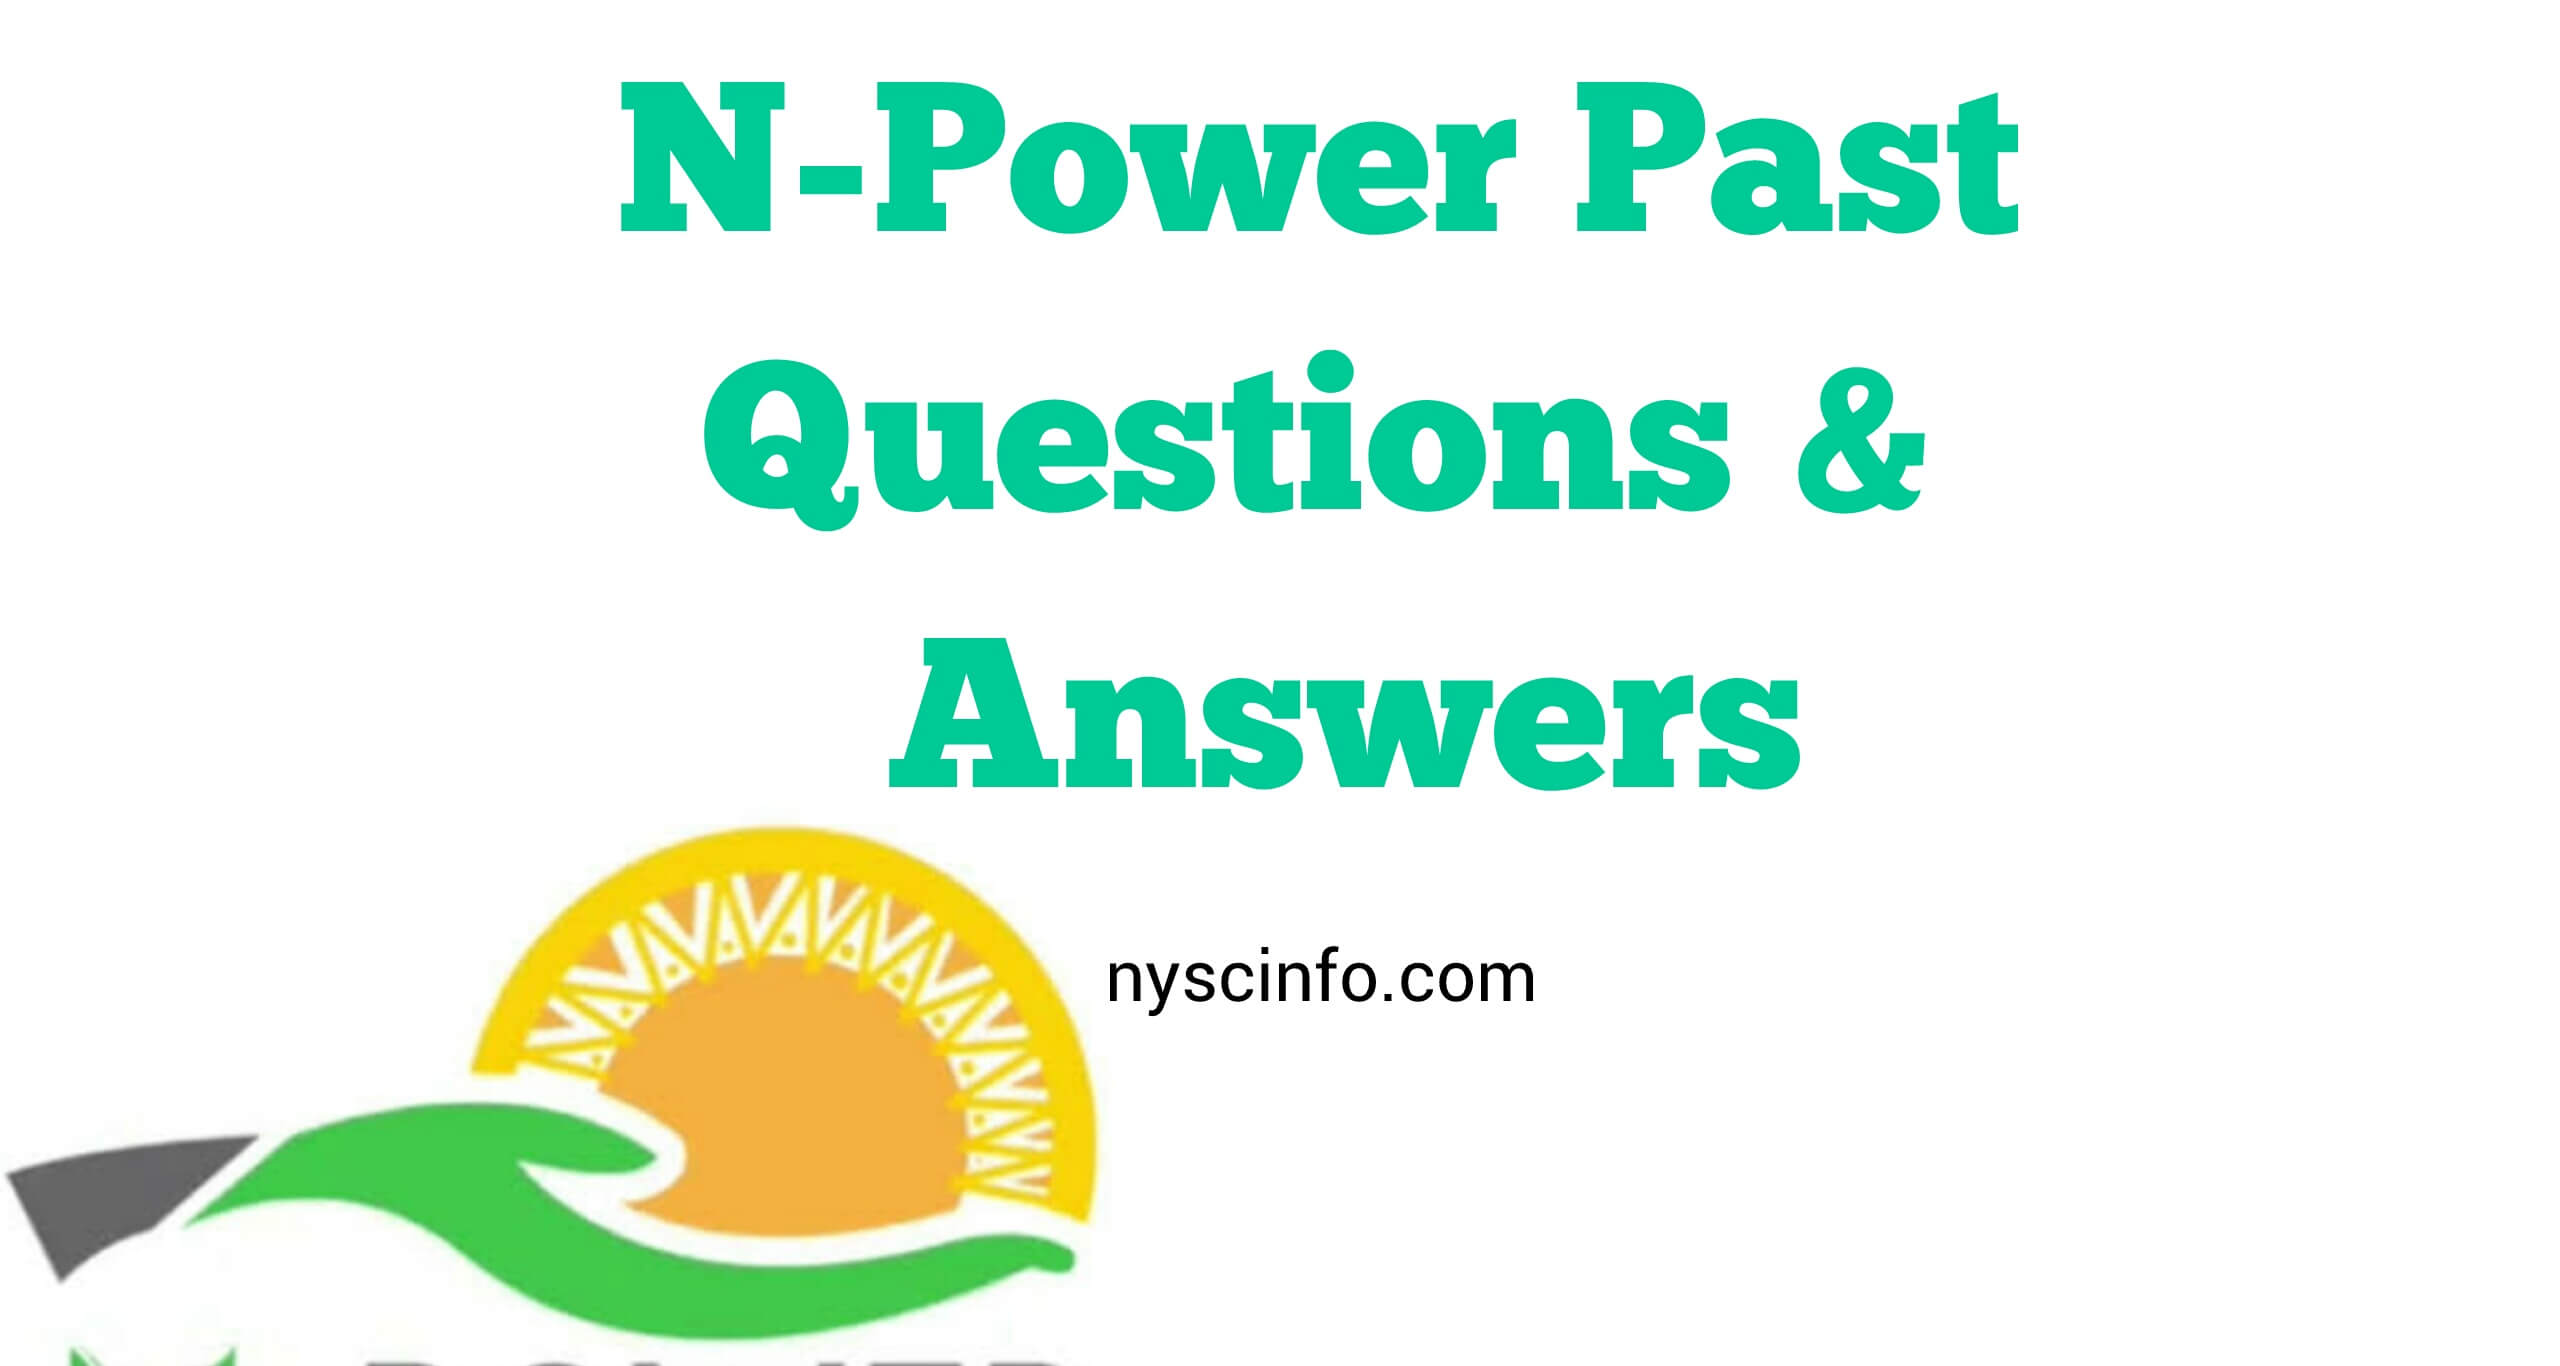 npower batch c selection test past questions answers pdf 2020 download here UBEC Screening Test